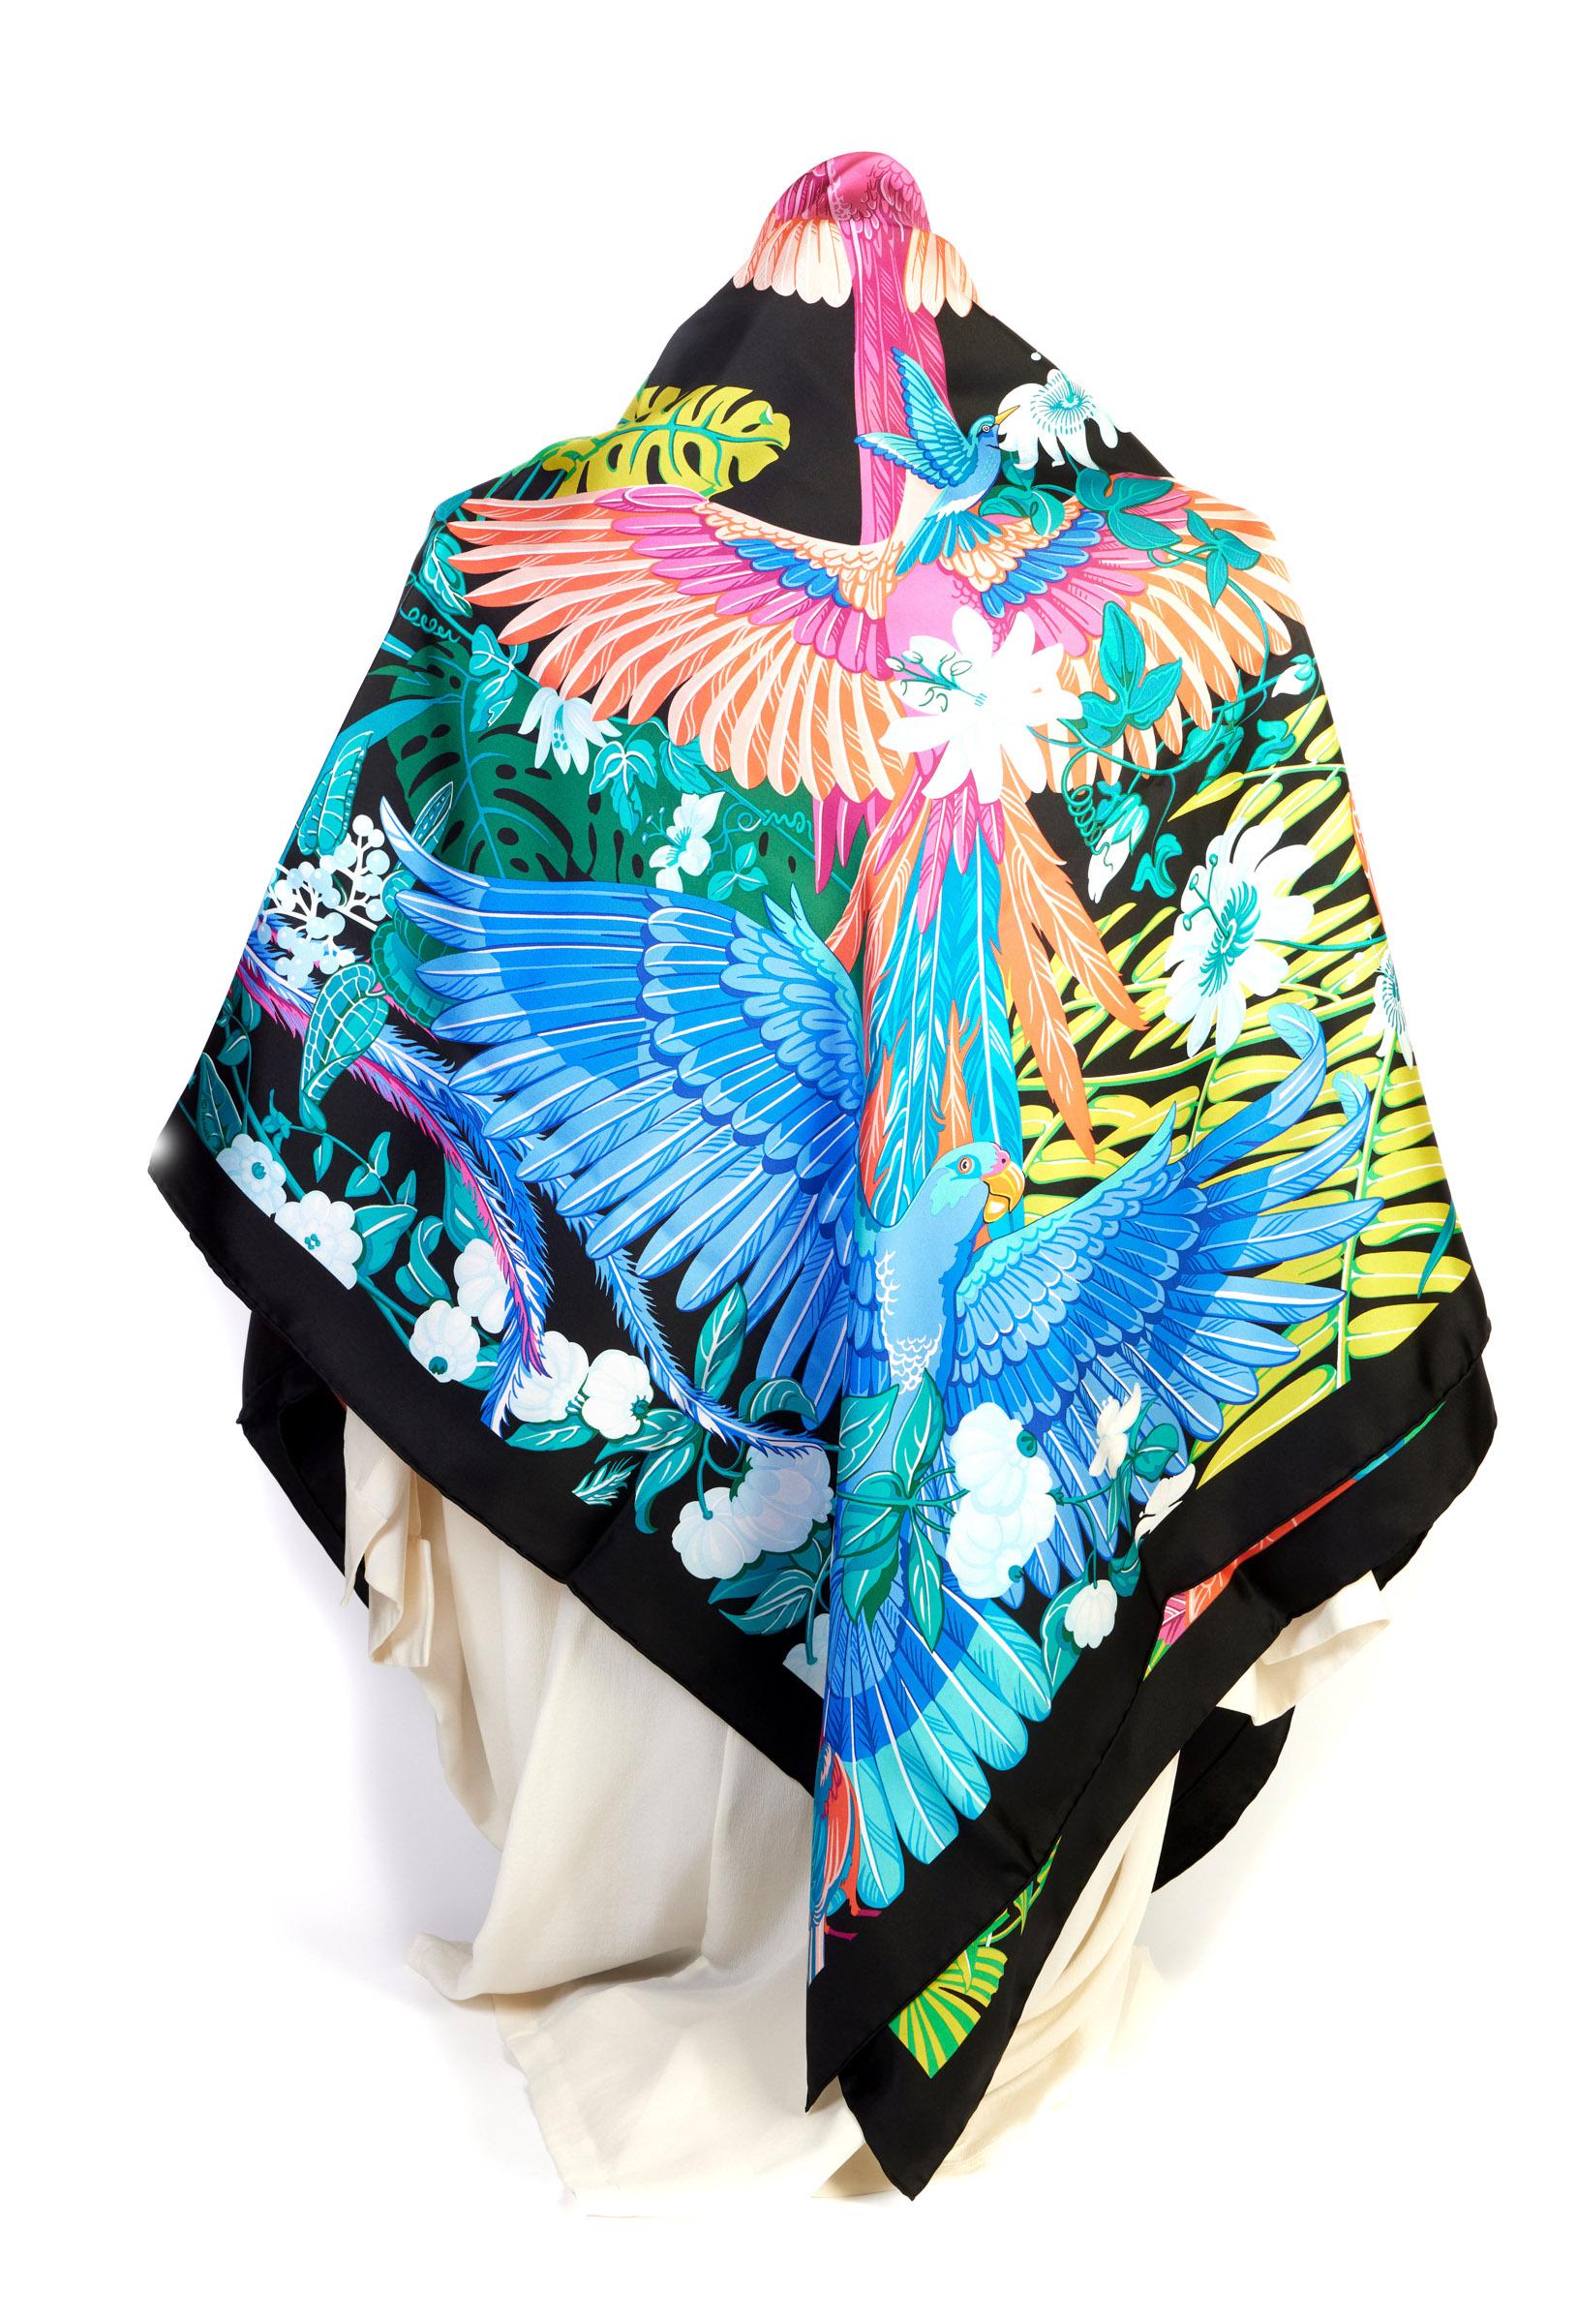 Hermes beautiful and collectible black oversize shawl with tropical colorful birds design. Hand rolled edges. Original care tag.